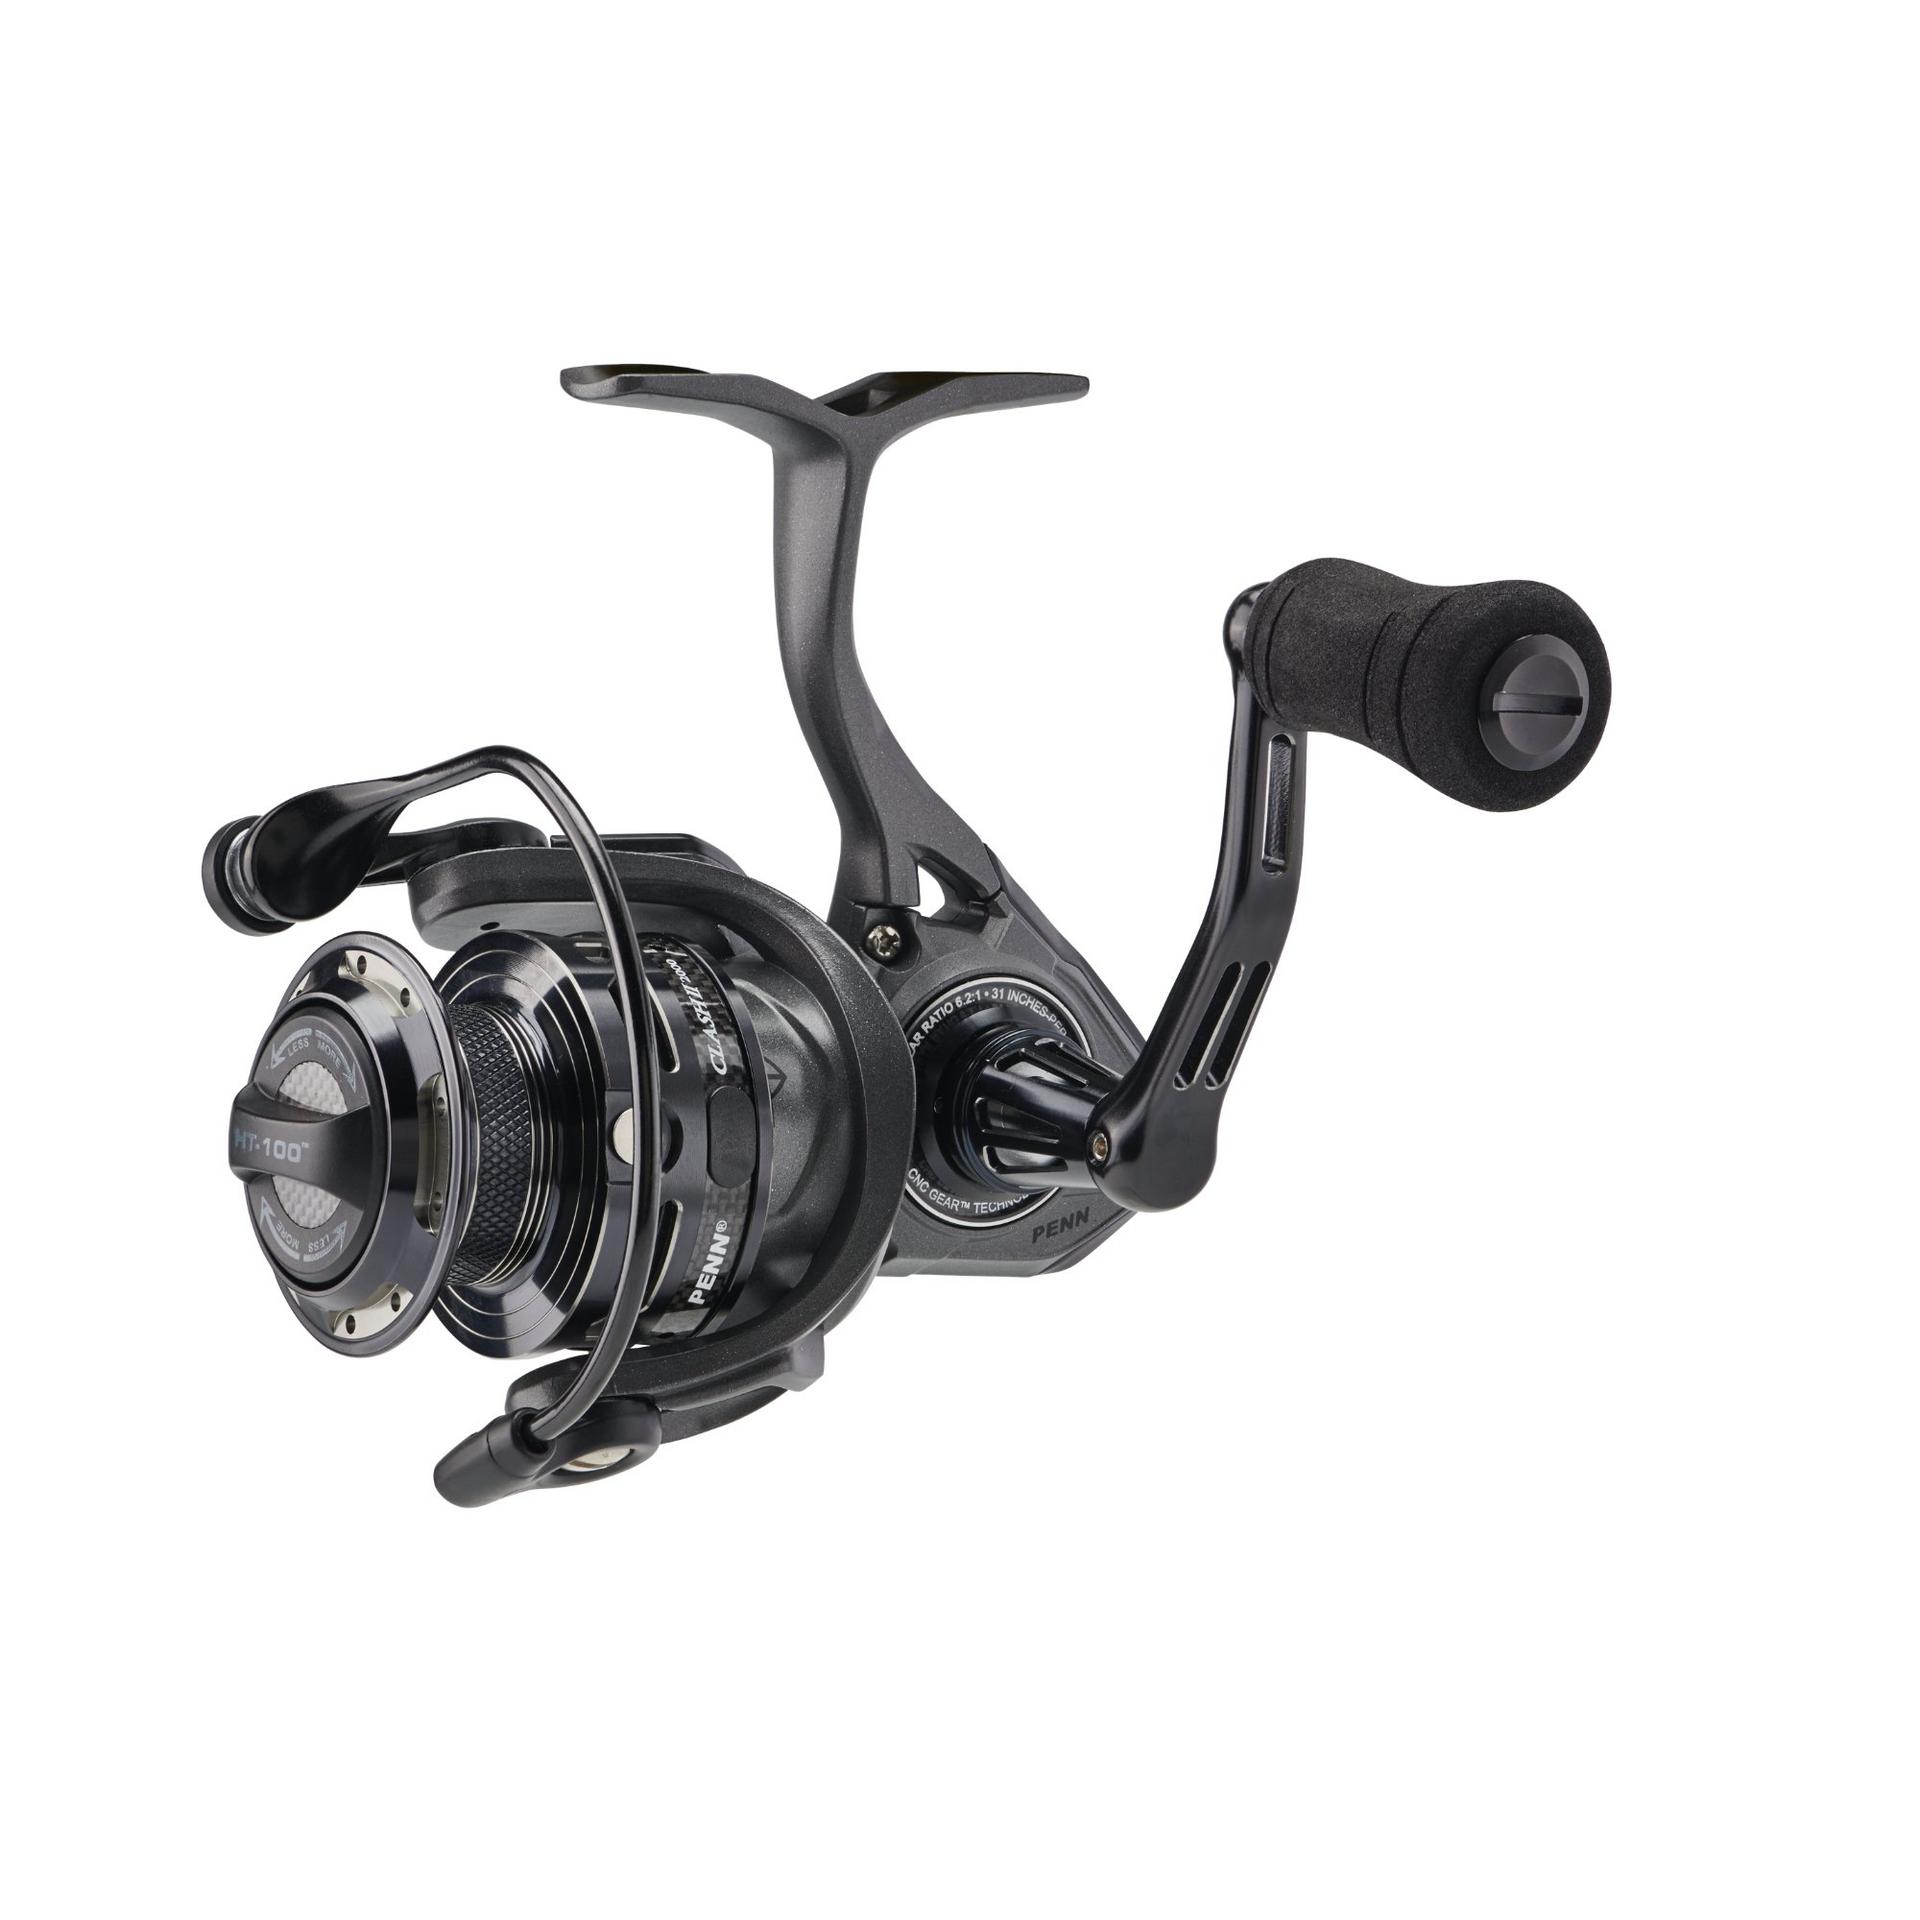 Penn Clash II 3000 spinning reel review - around £180 here in the